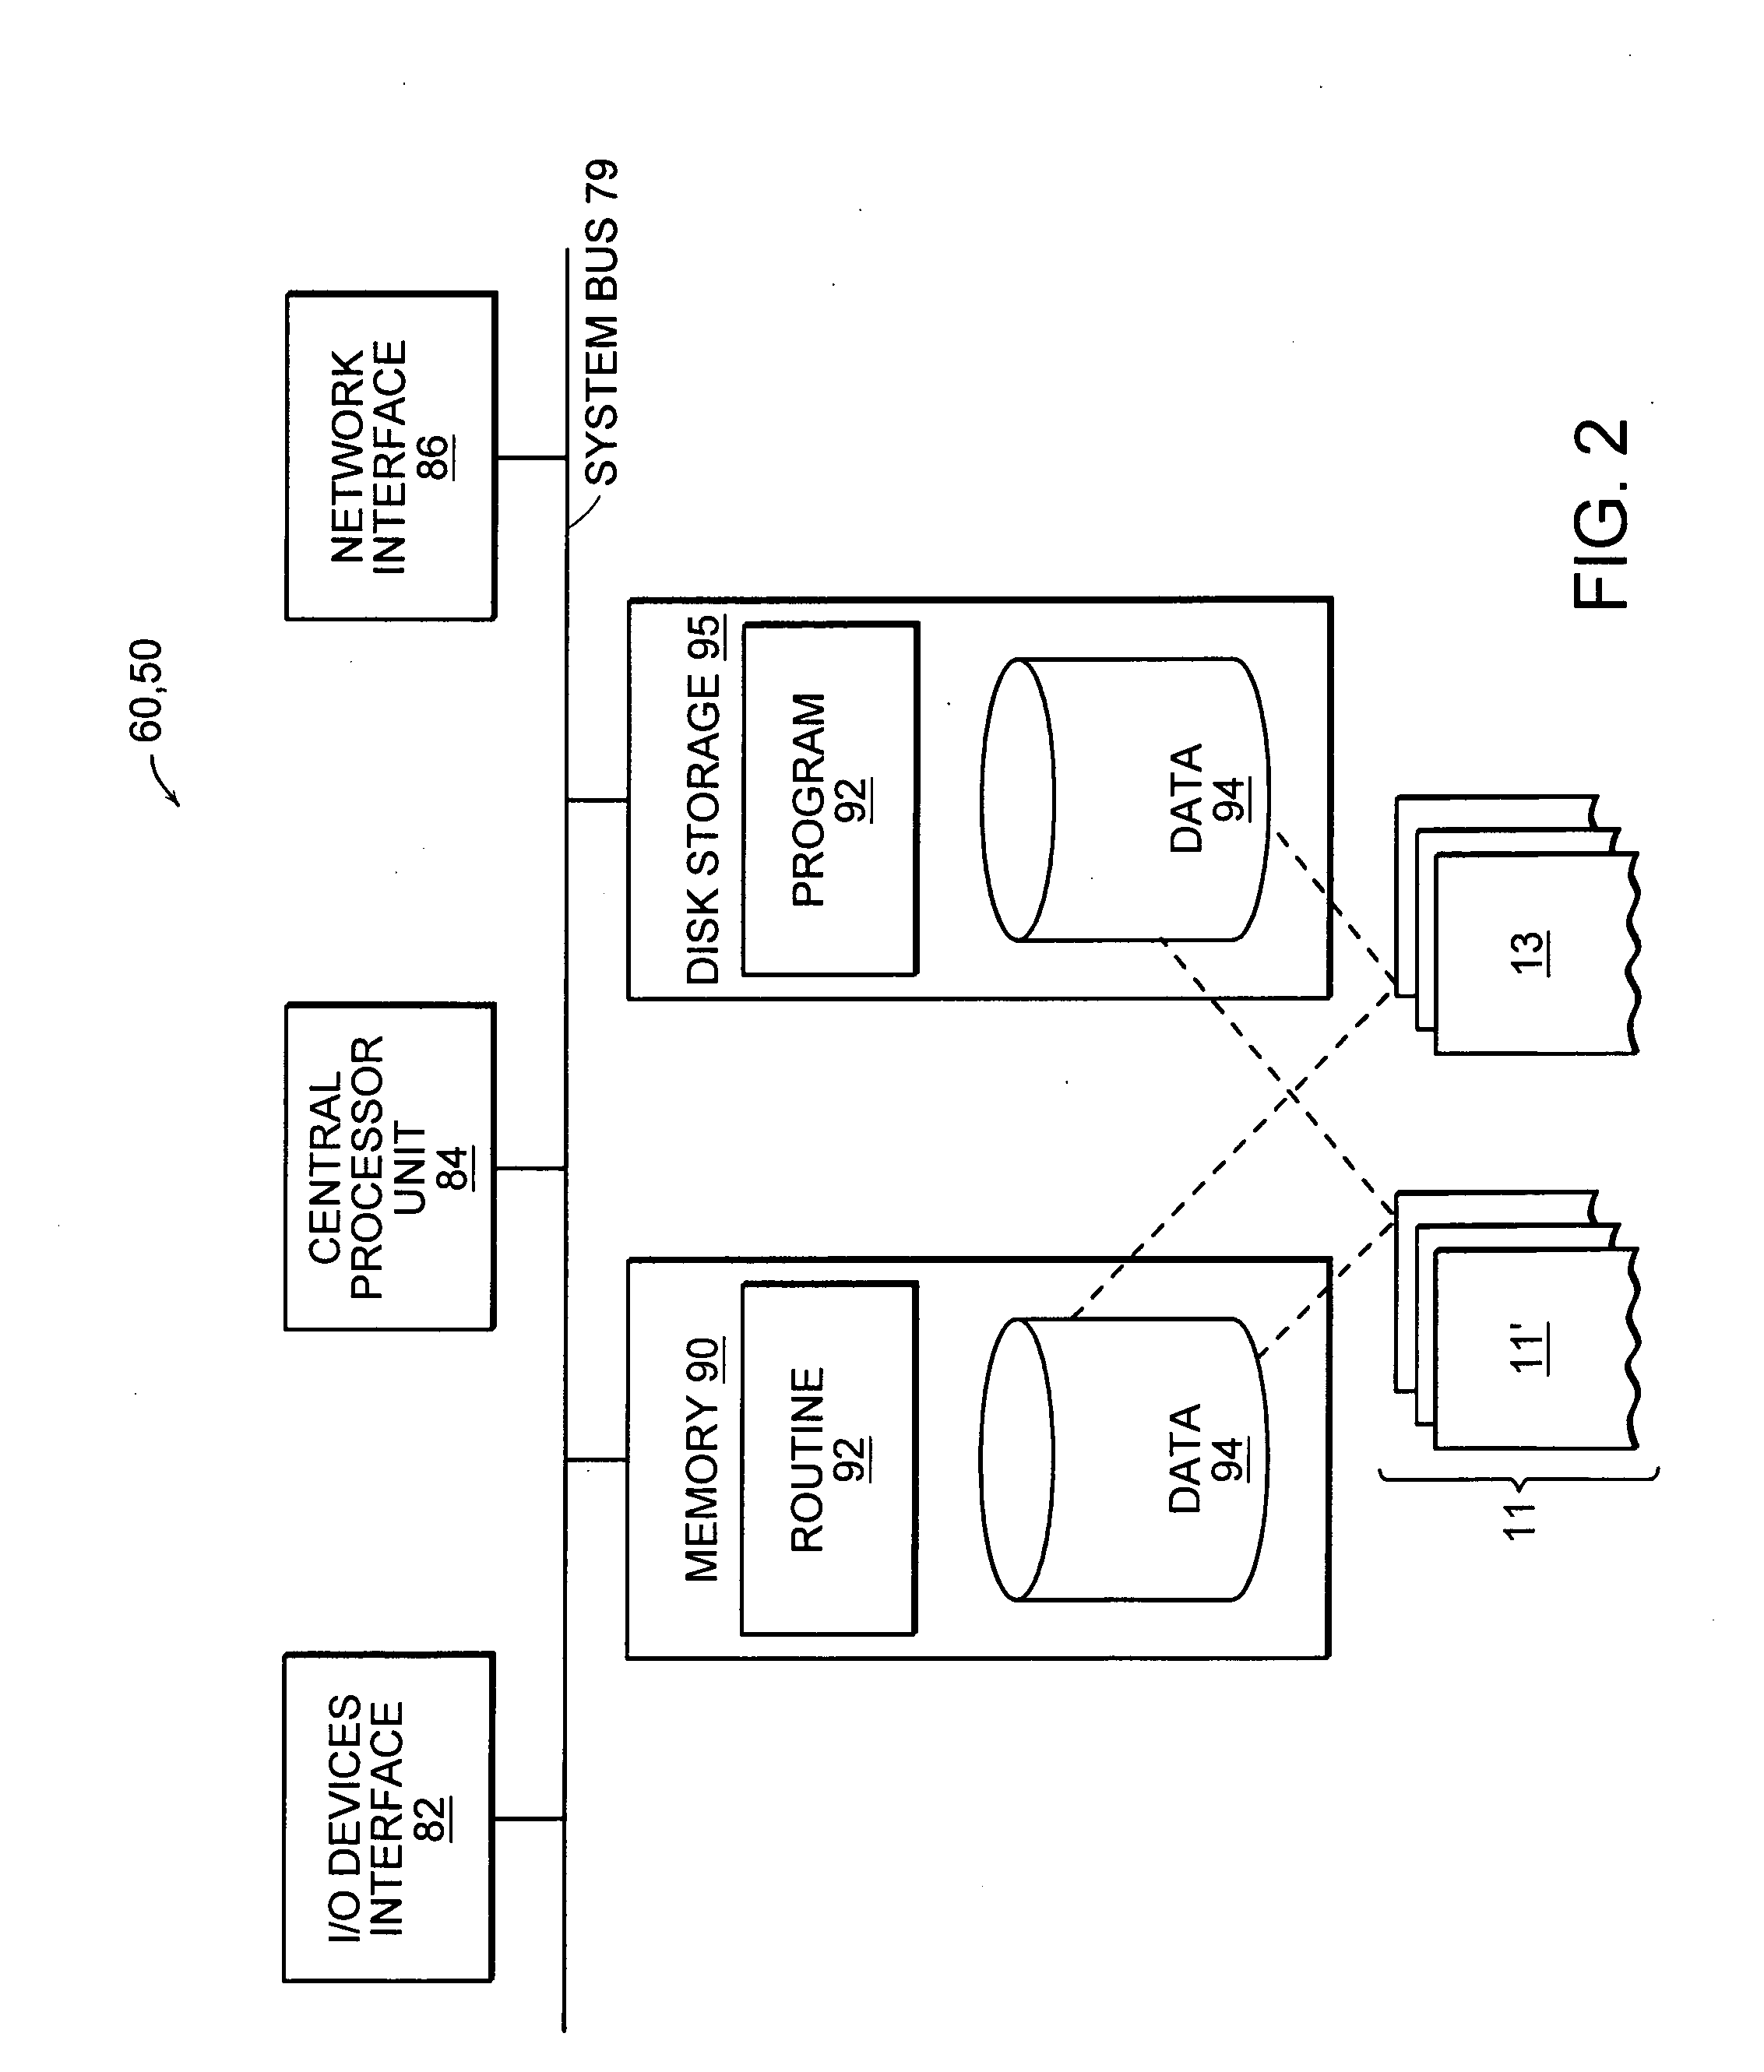 Content-based synchronization method and system for data streams